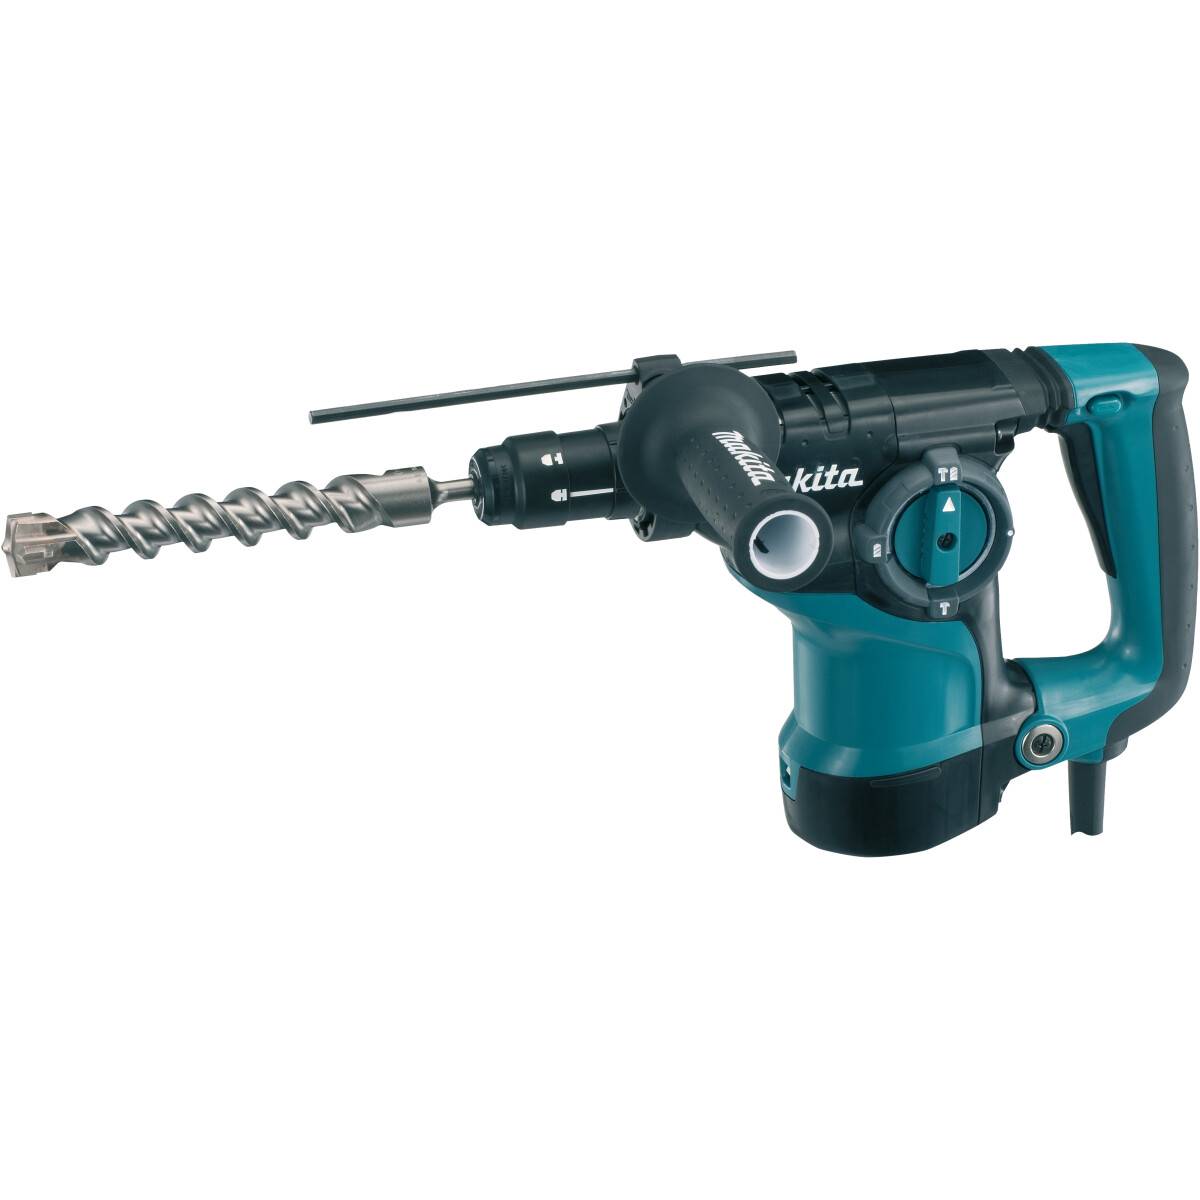 Makita HR2811FT-1 240v SDS Rotary Hammer Drill (with FREE chisel and 15 SDS  Drill bits) 240v from Lawson HIS